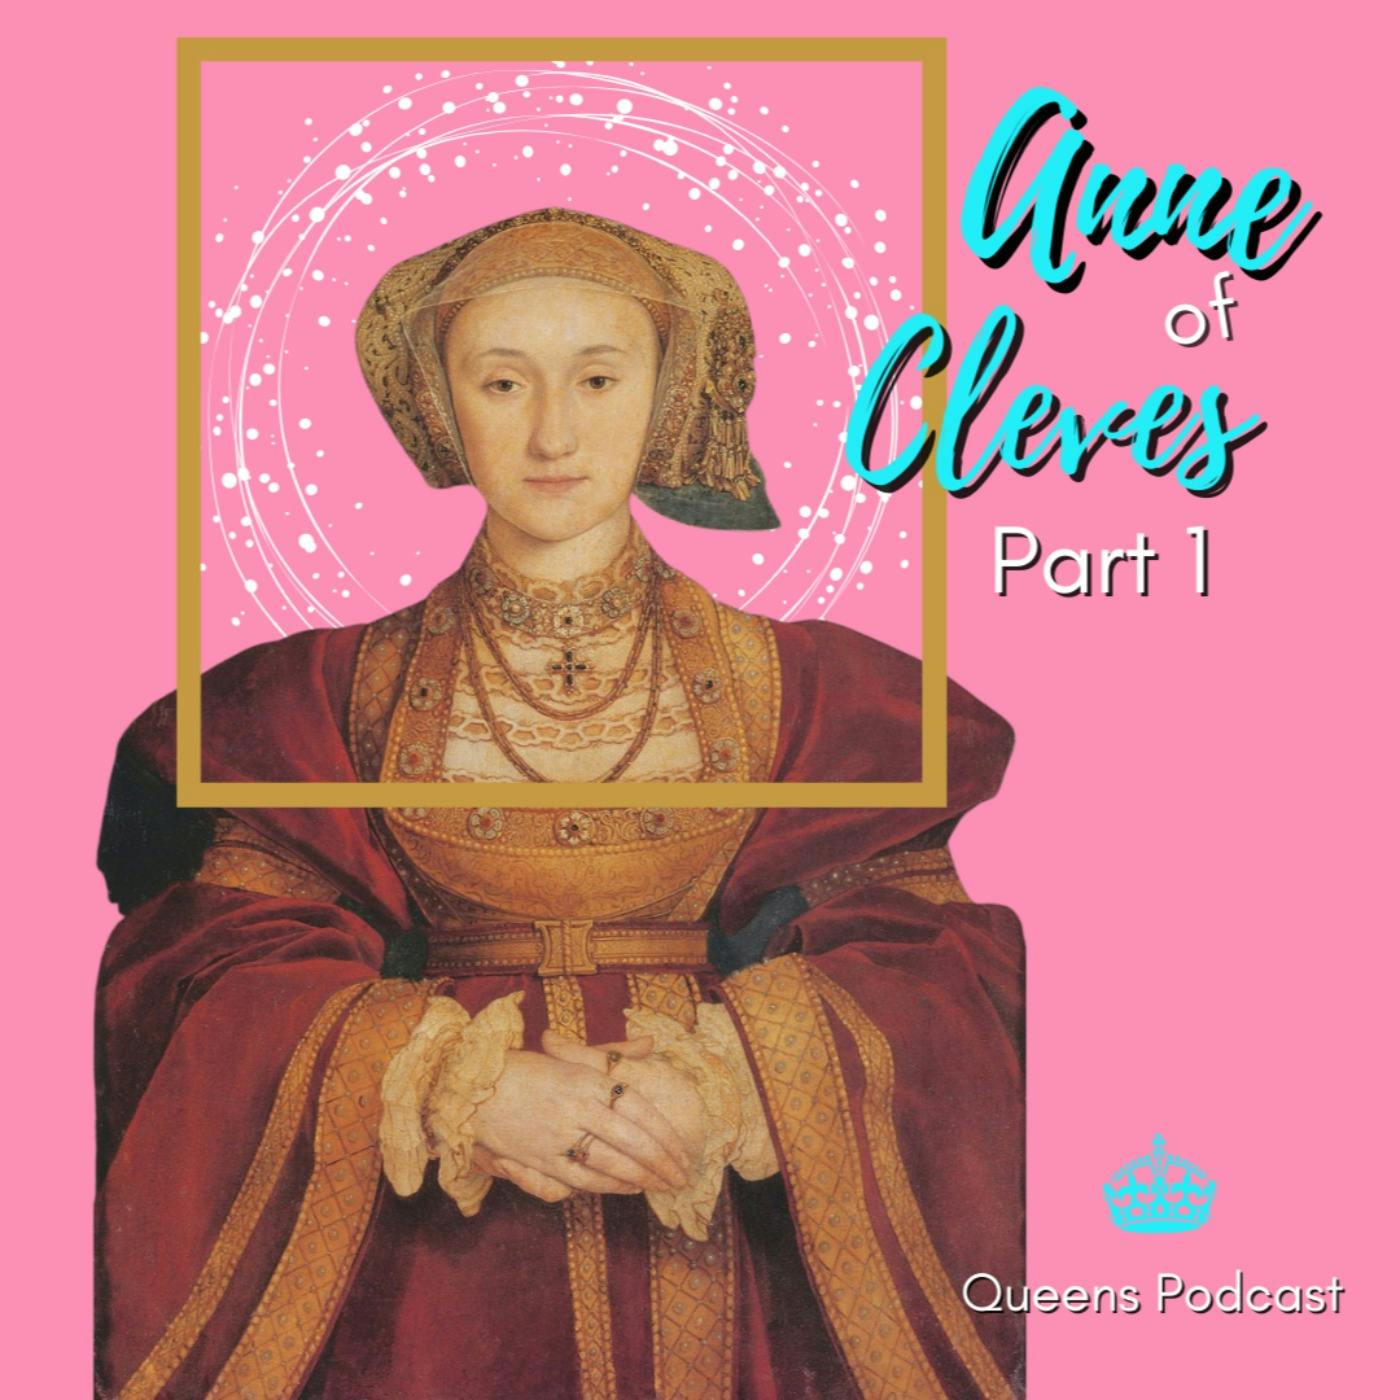 Anne of Cleves, part 1